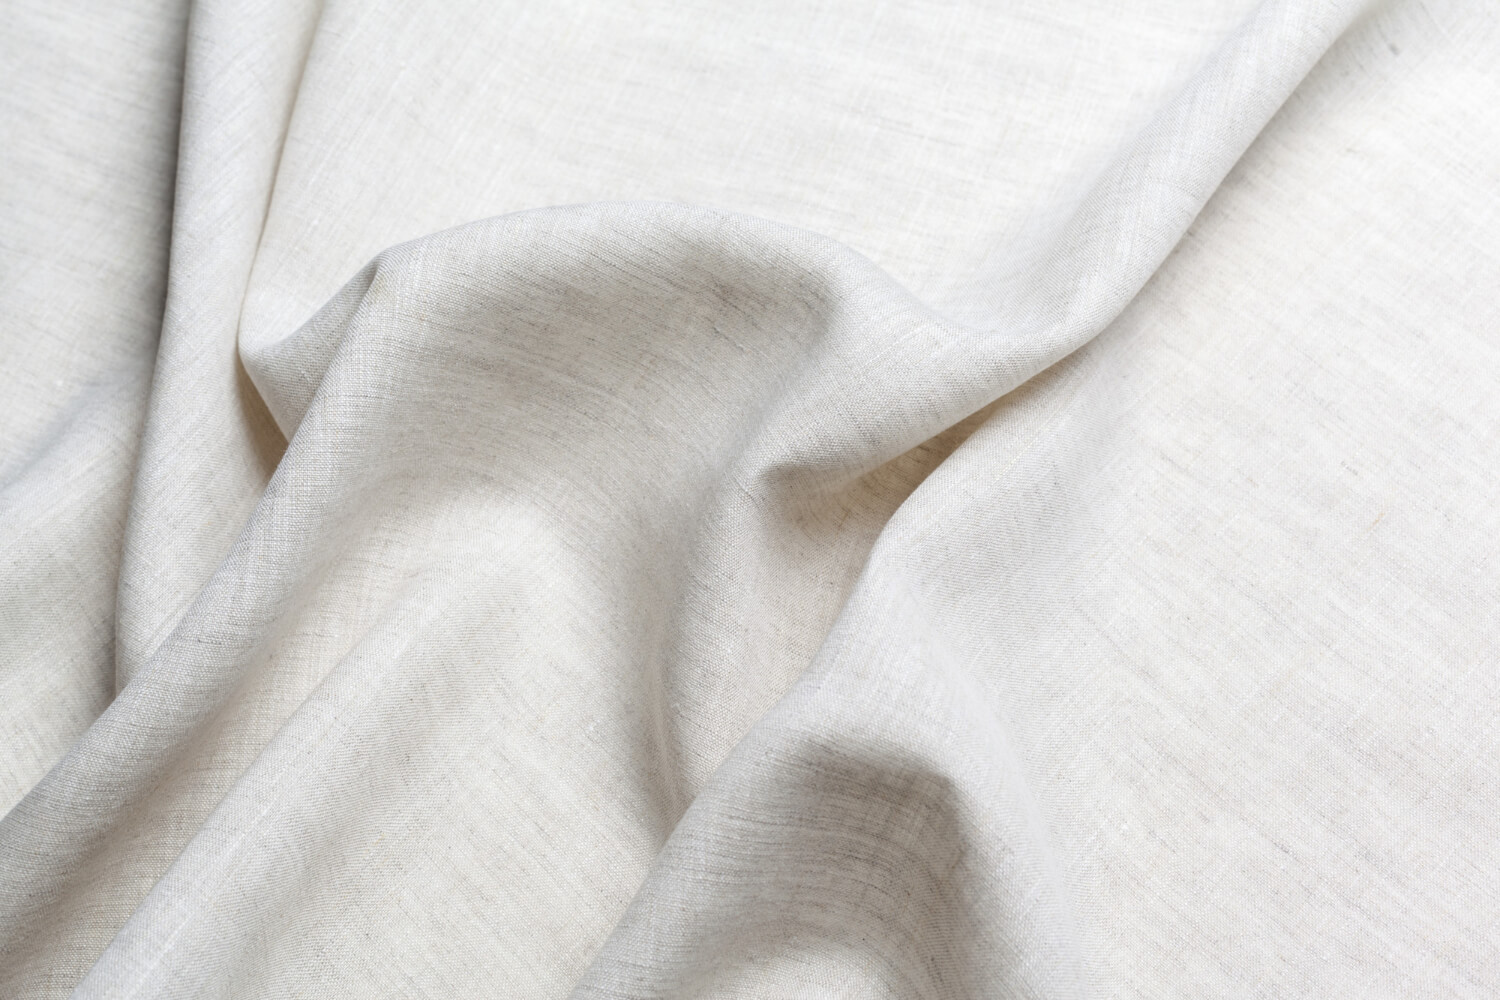 Linen bedding – why should you choose it?